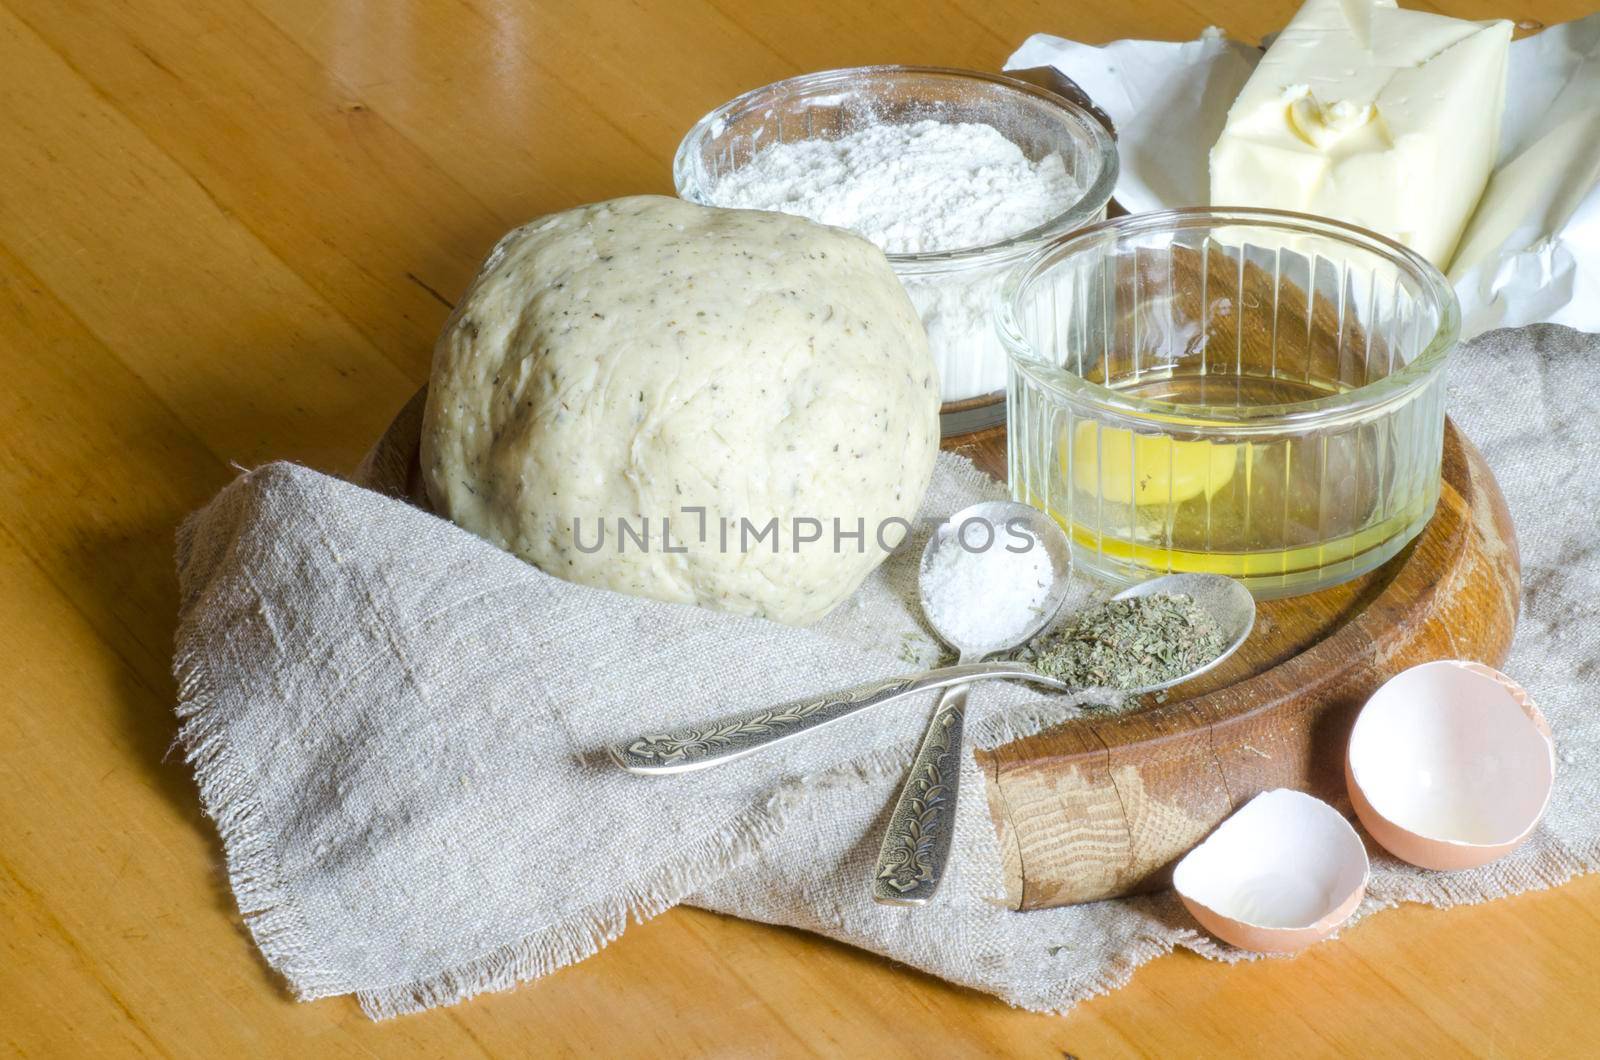 Ingredients for the dough: eggs, flour, oil, salt. From series "Cooking vegetable pie"